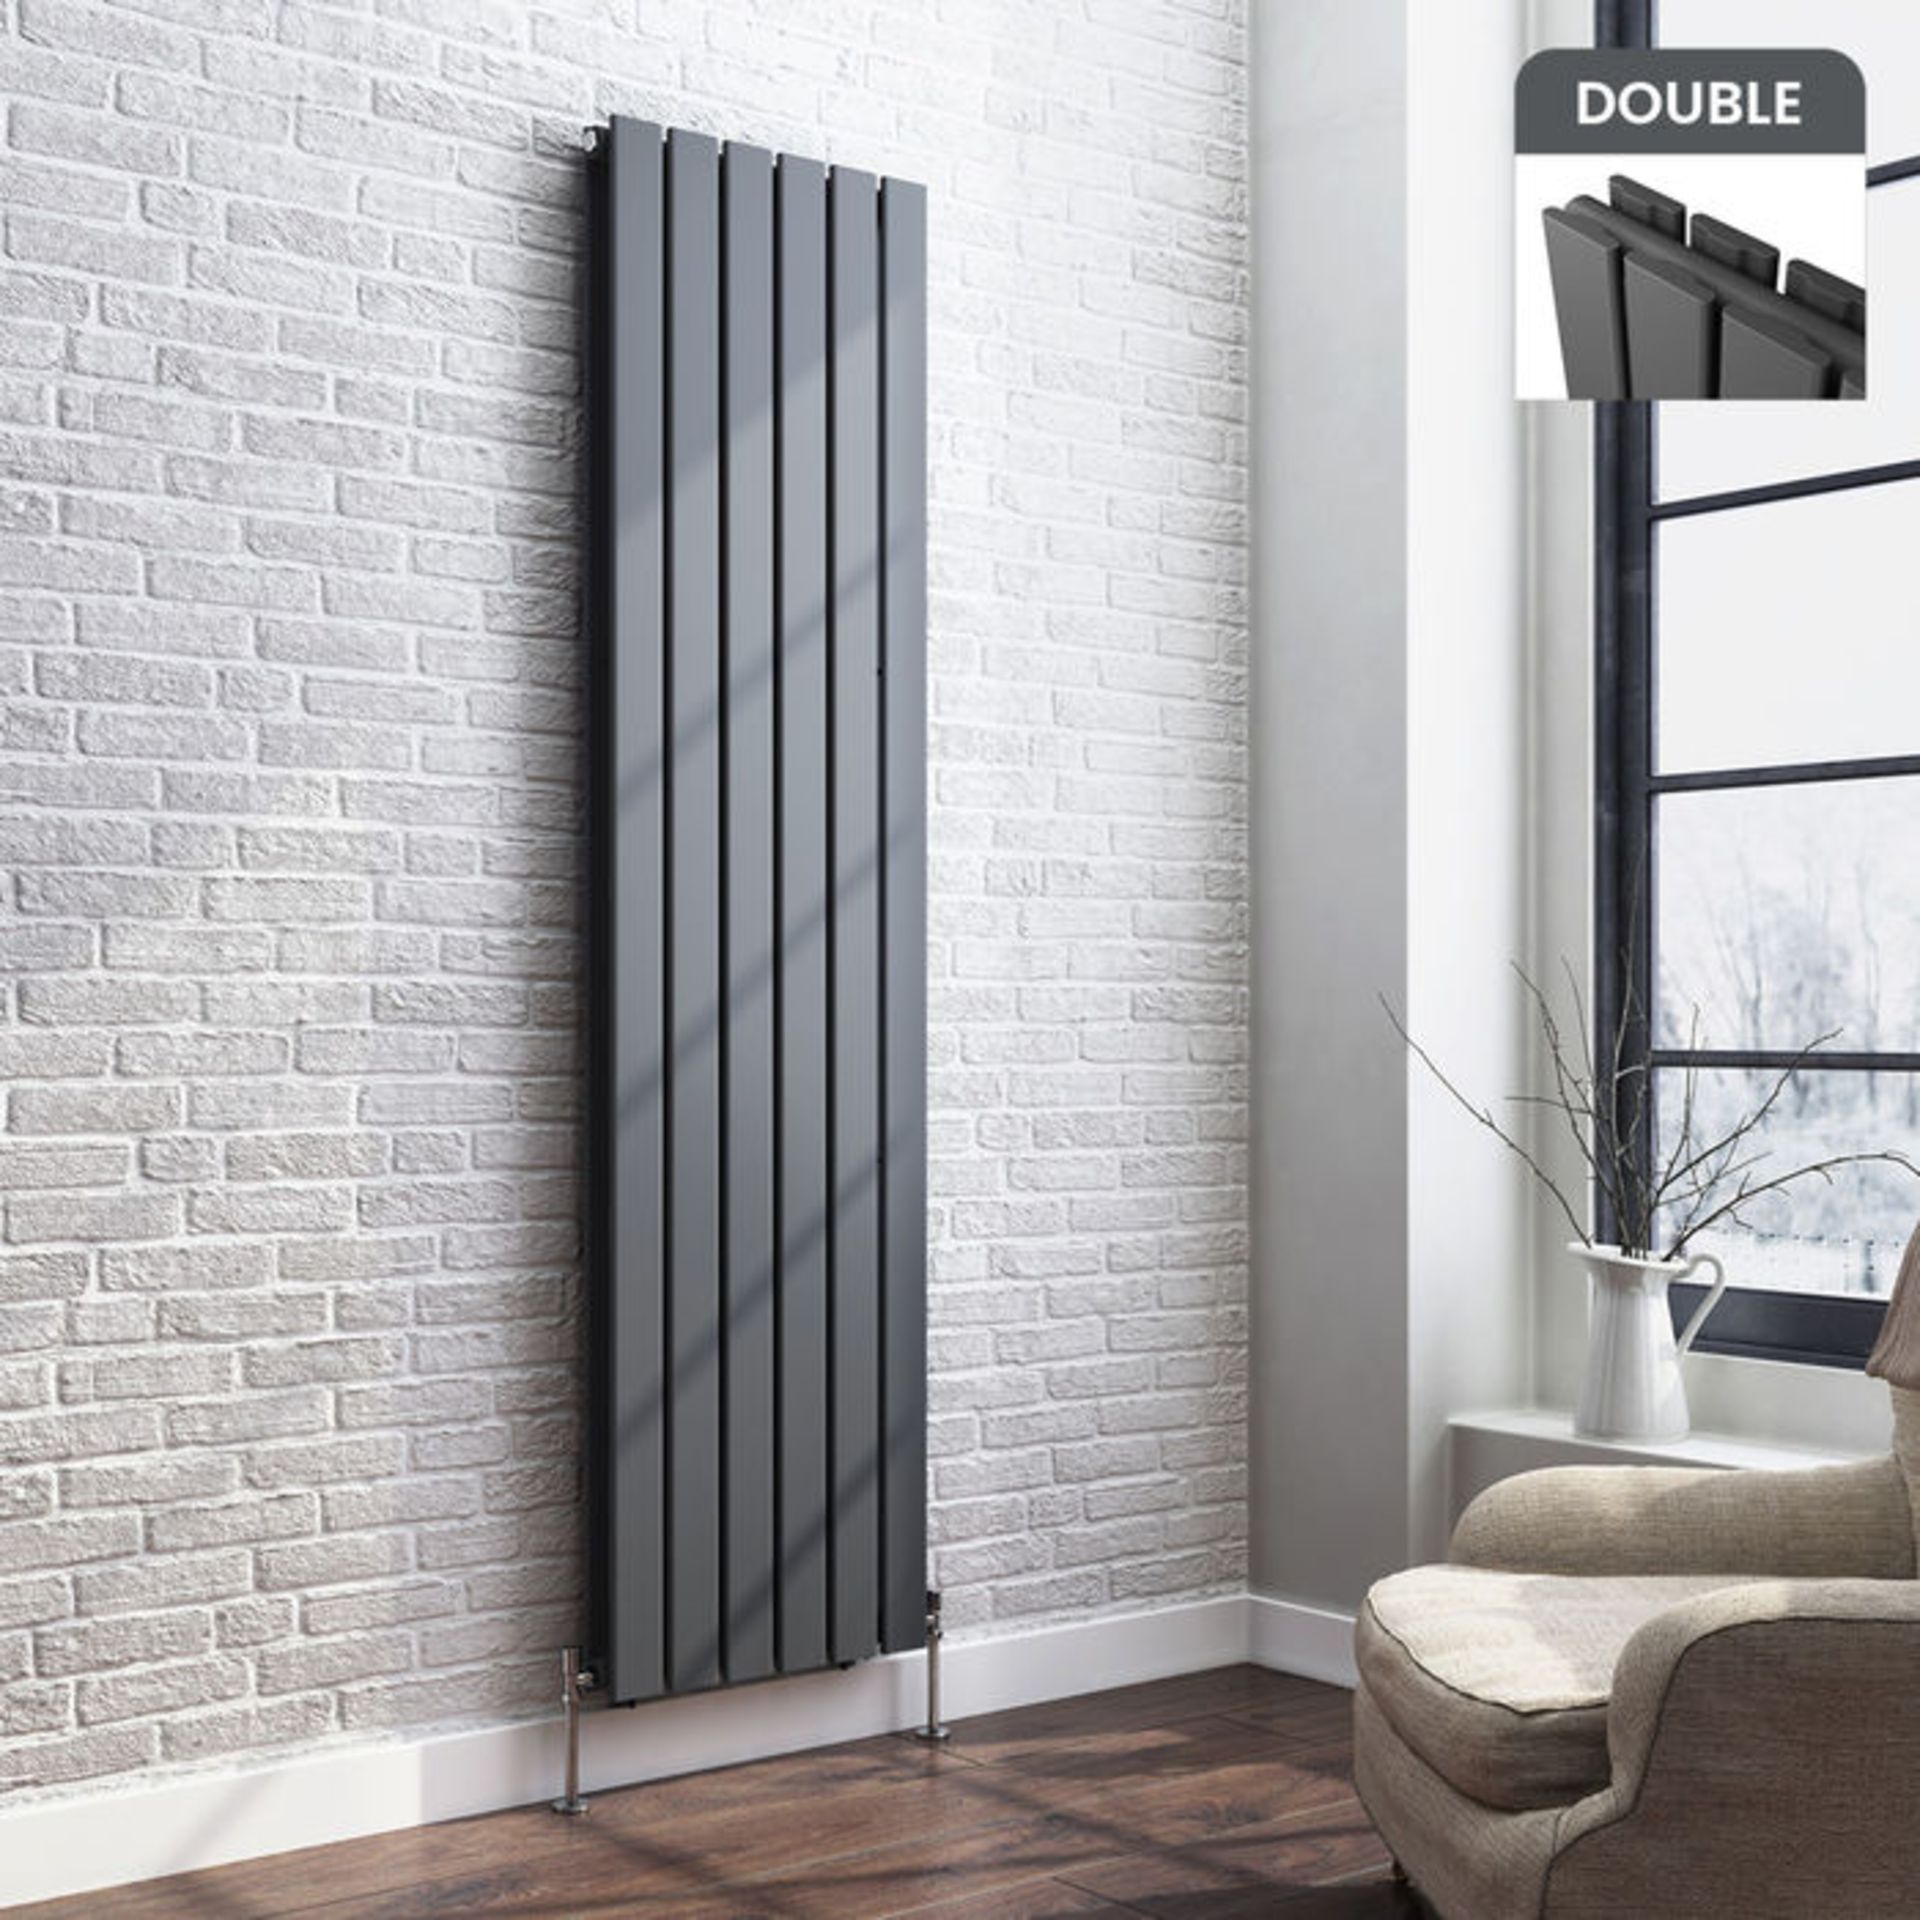 (O4) 1800x458mm Anthracite Double Flat Panel Vertical Radiator. RRP £499.99. Made with low carbon